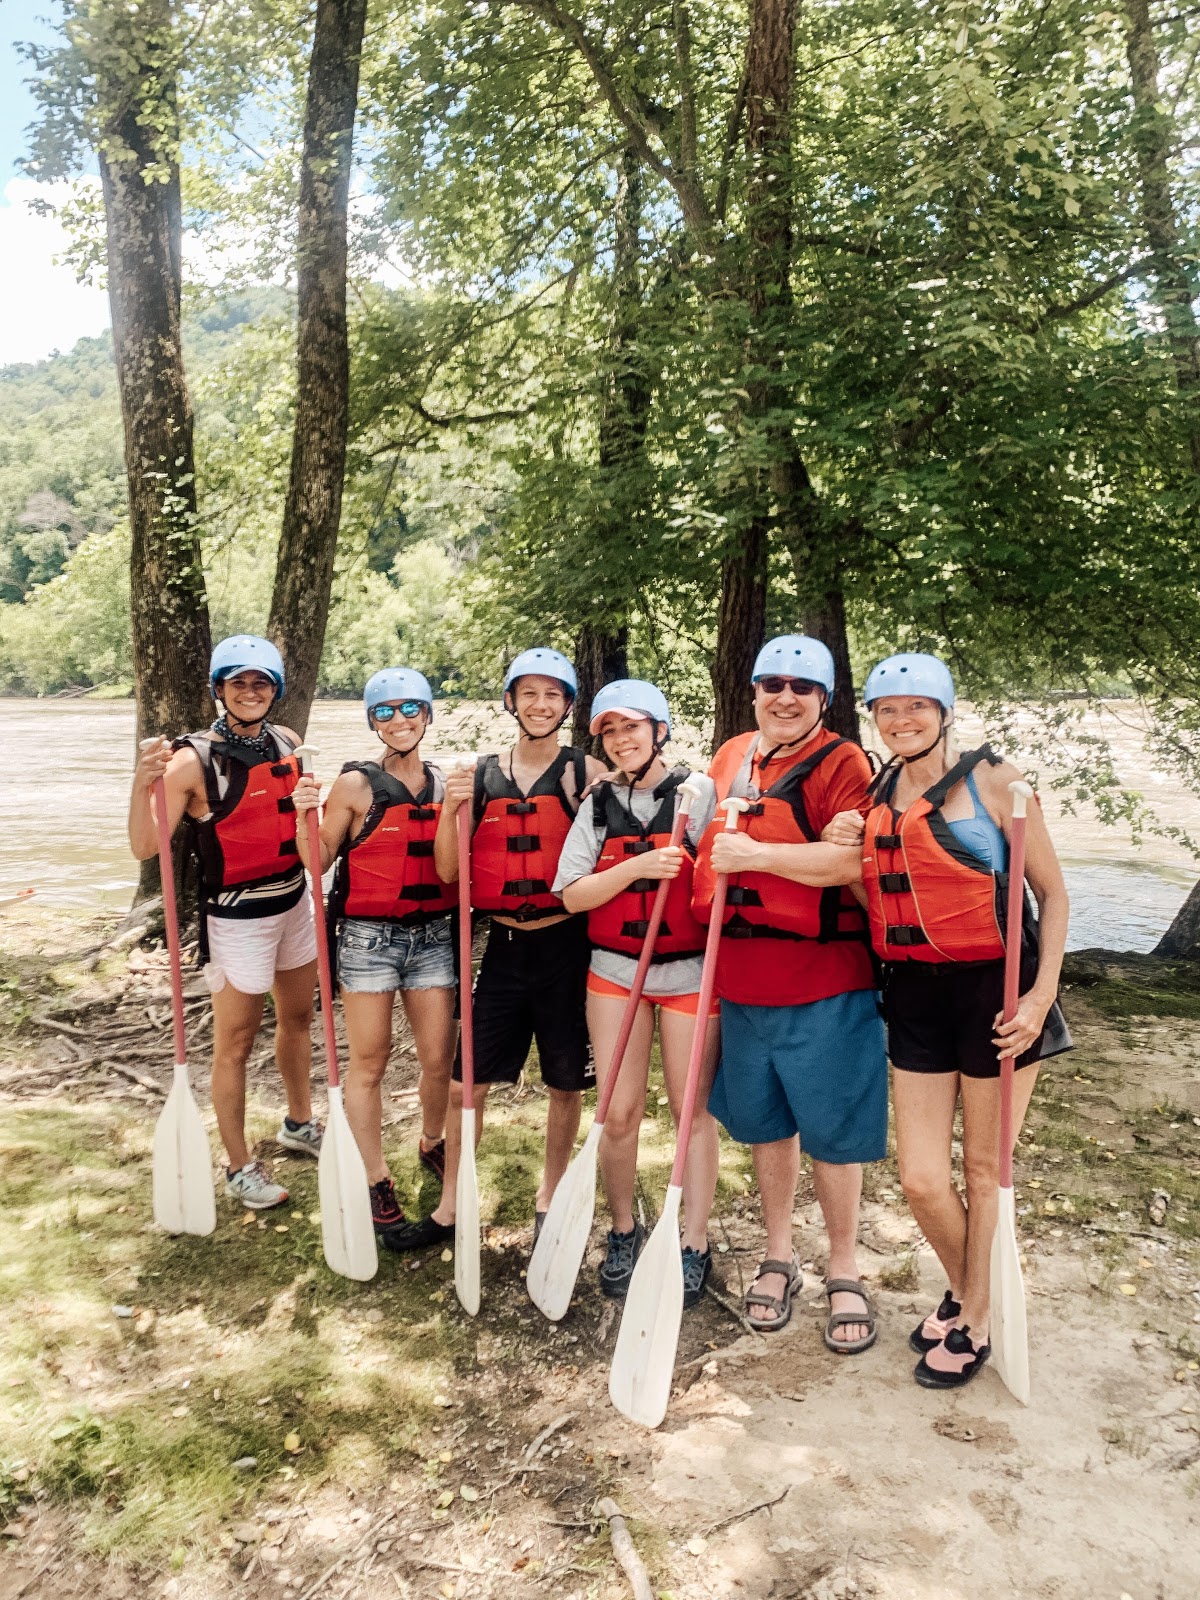 New volunteers Rae McMannis (far left) and Diane Sohl (far right) team up with IoH board member Tony Reid (second from right) to help make lasting memories with the Evans-Johnson family on the French Broad River! 